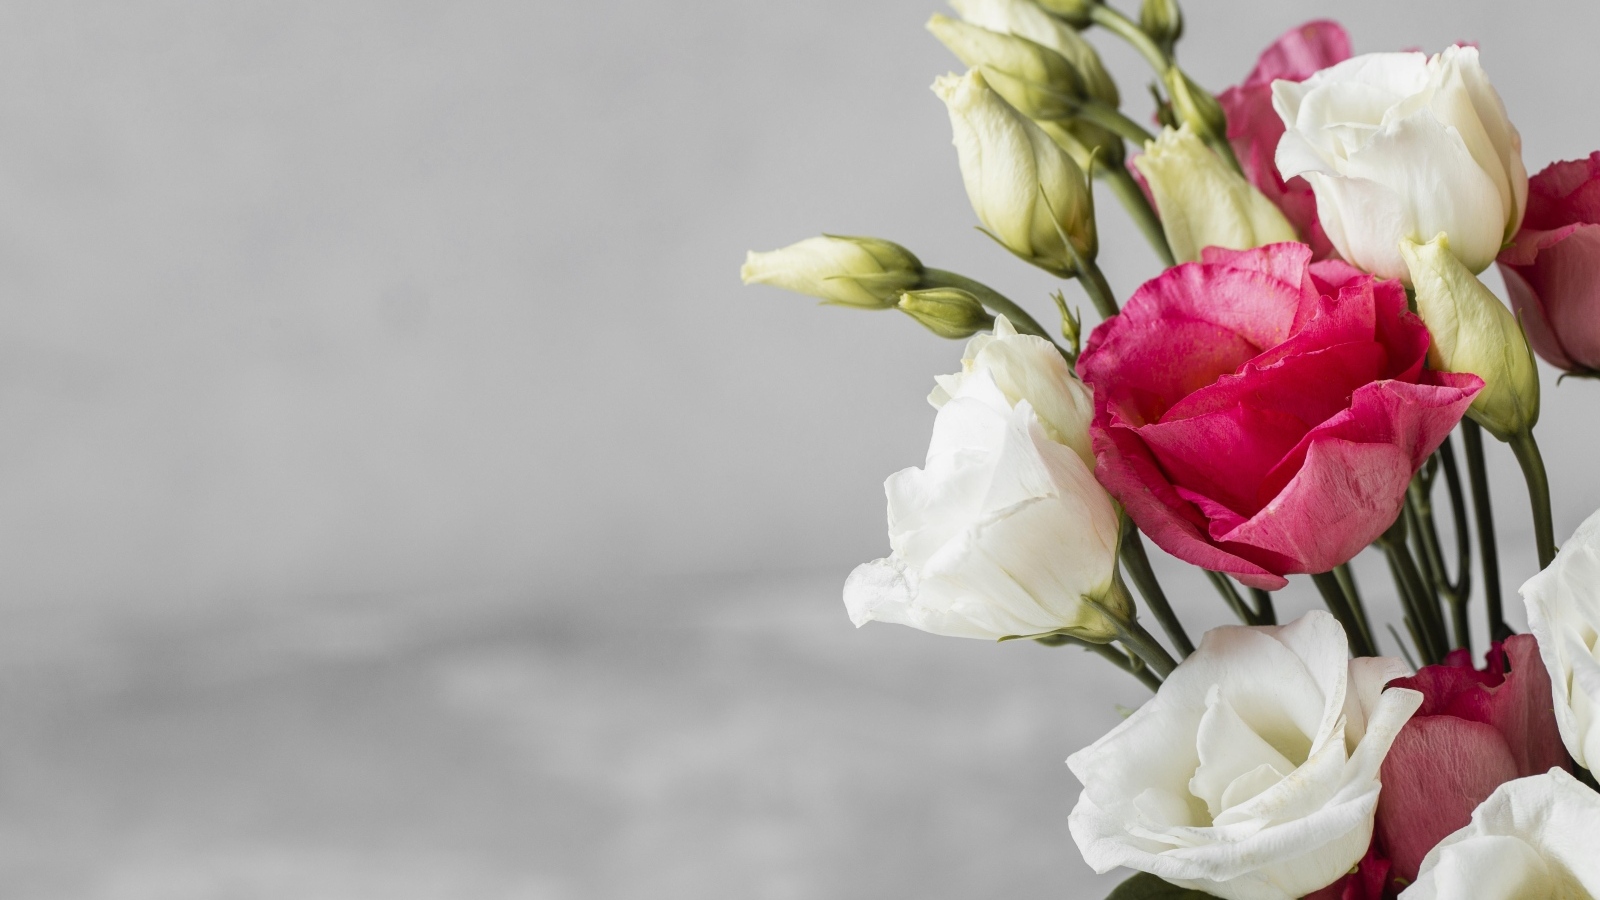 White and pink eustoma flowers on a gray background